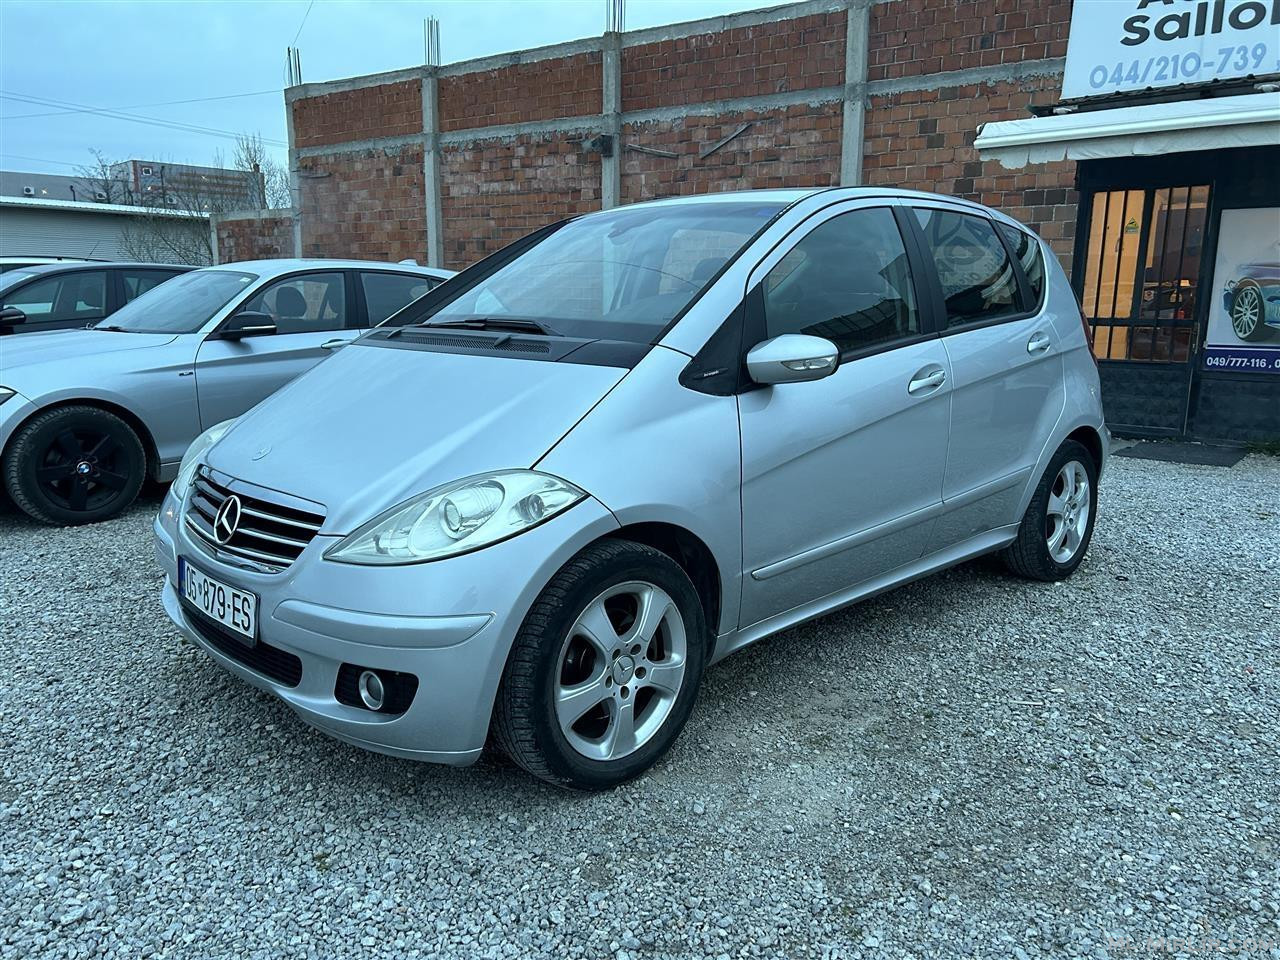 shes Mercedes Acllas 180 cdi 8 muj rks 2006